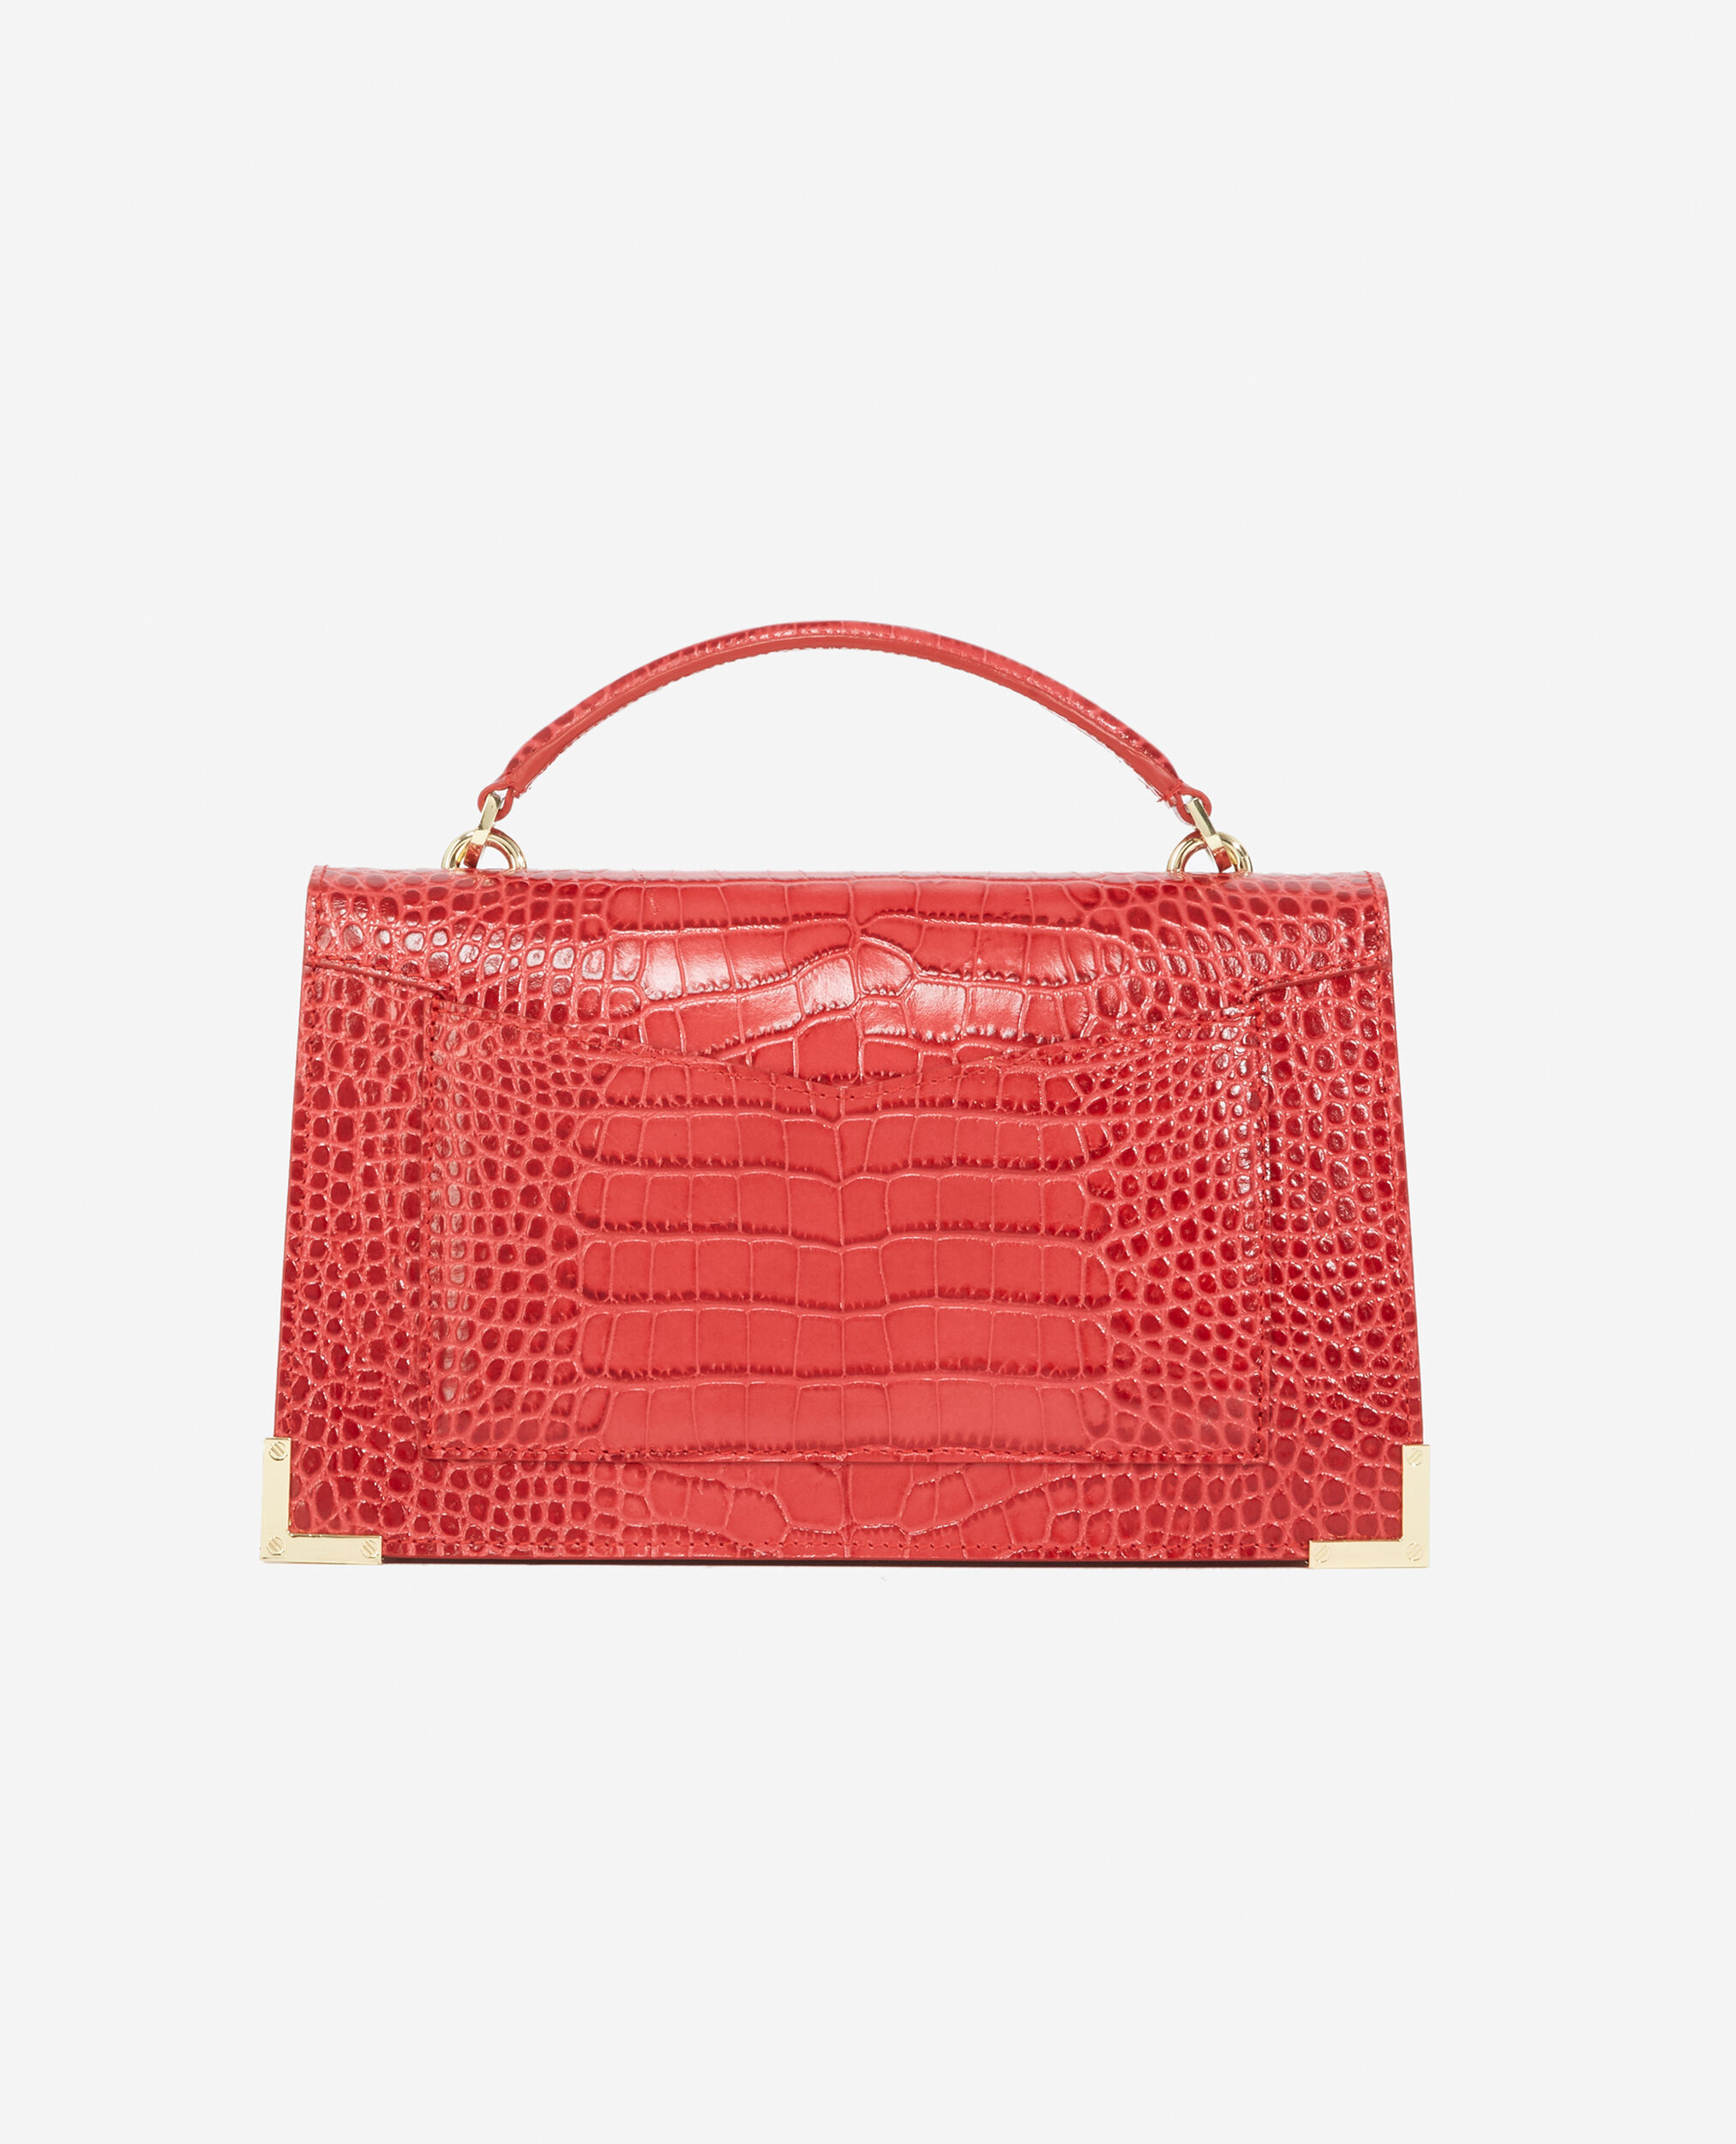 Medium-size croco-effect Emily Bag, RED, hi-res image number null